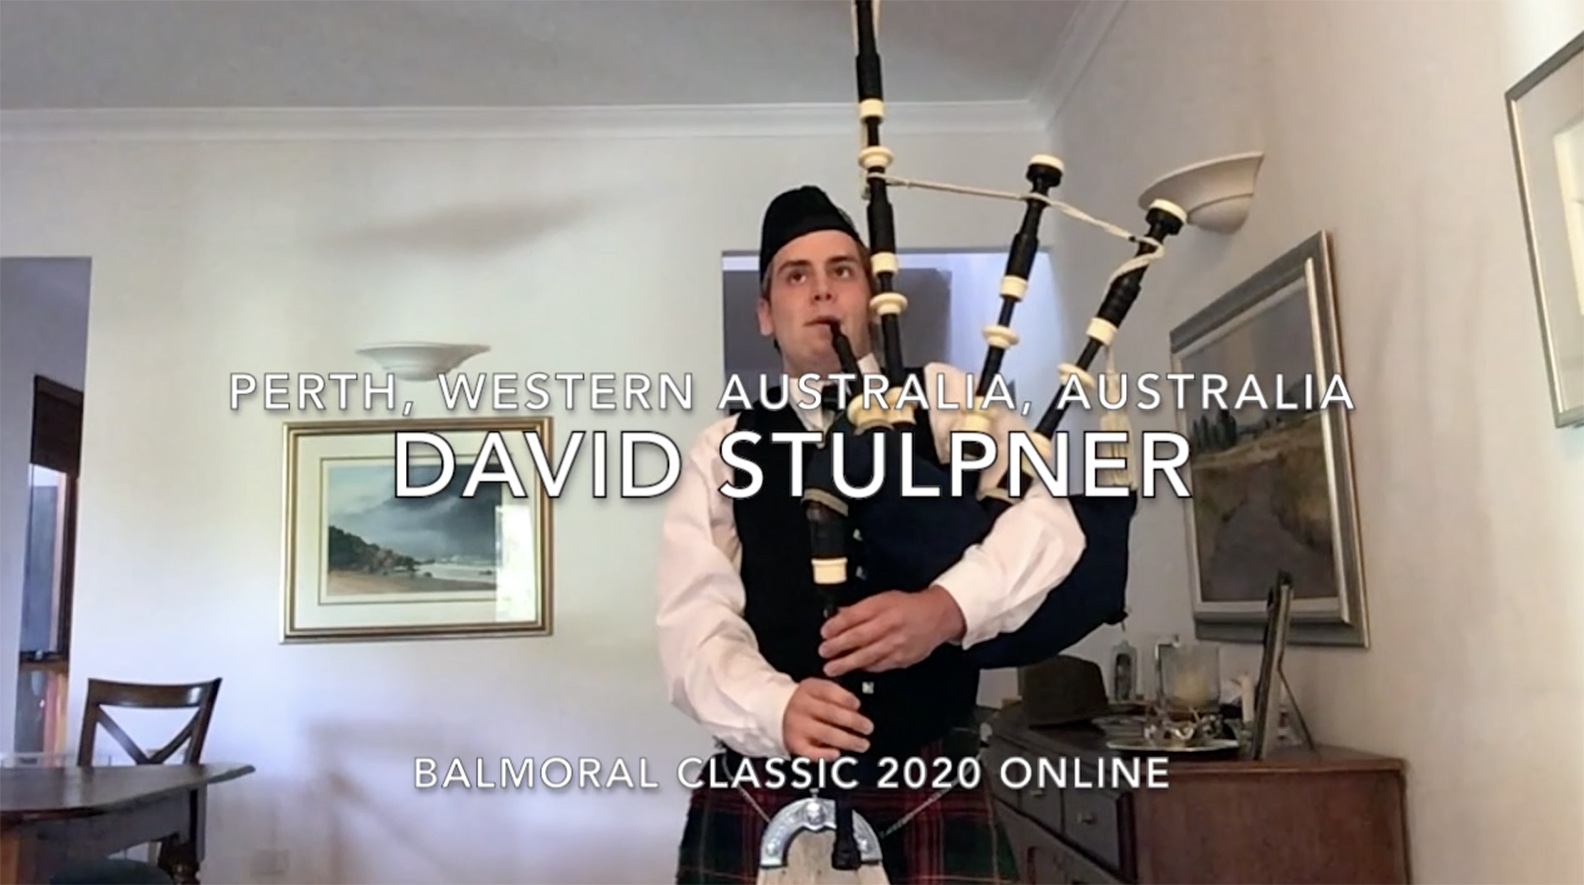 Winner of the 2020 Balmoral Classic US Junior Piping & Drumming Championships, Overall in Piping.